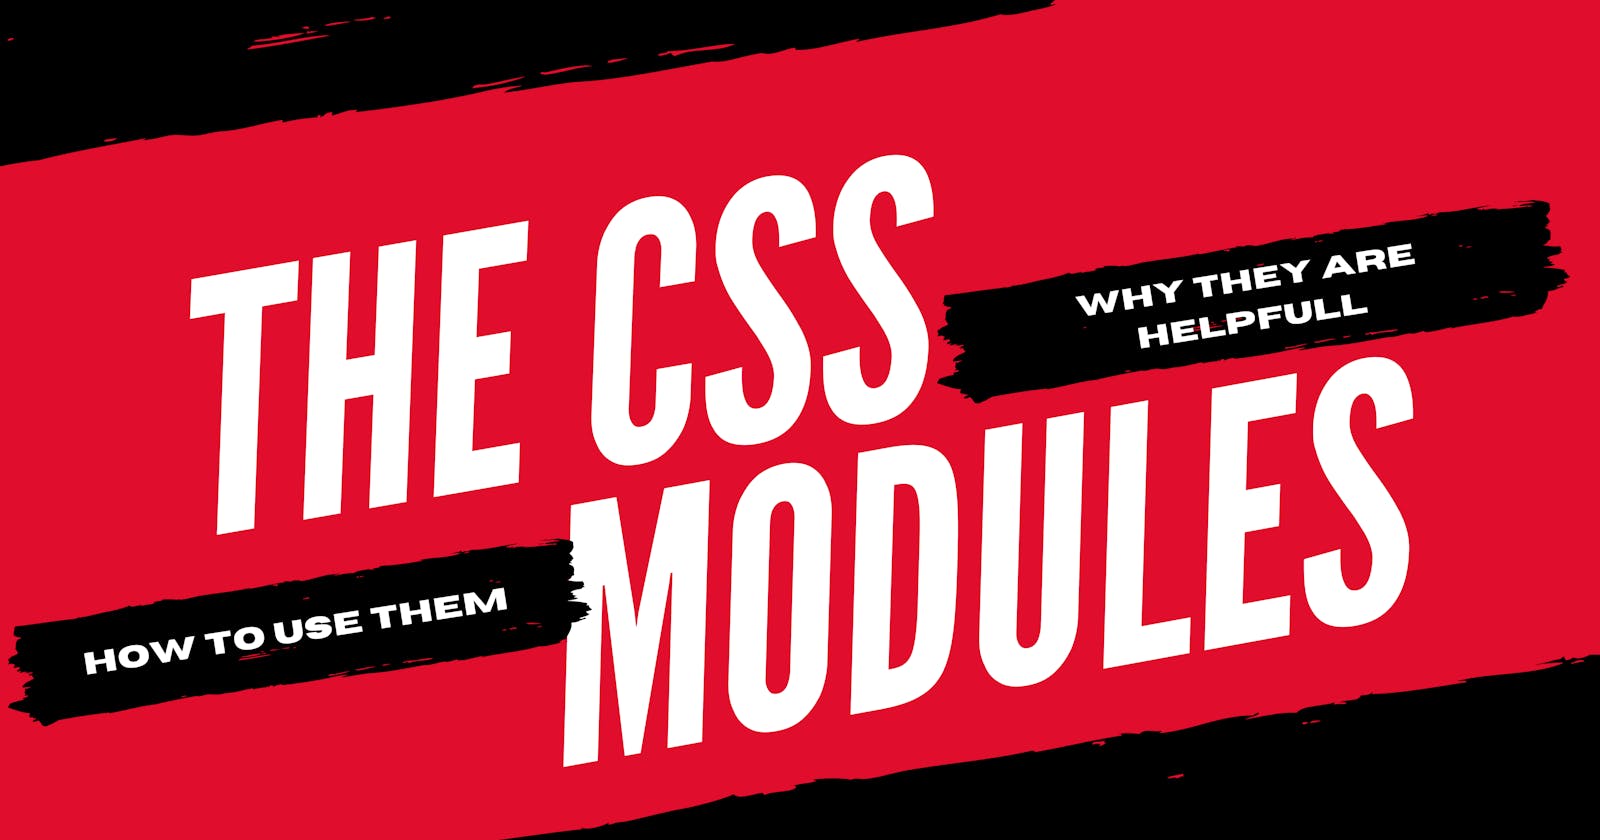 The CSS Modules: How to use them and why they are helpful.